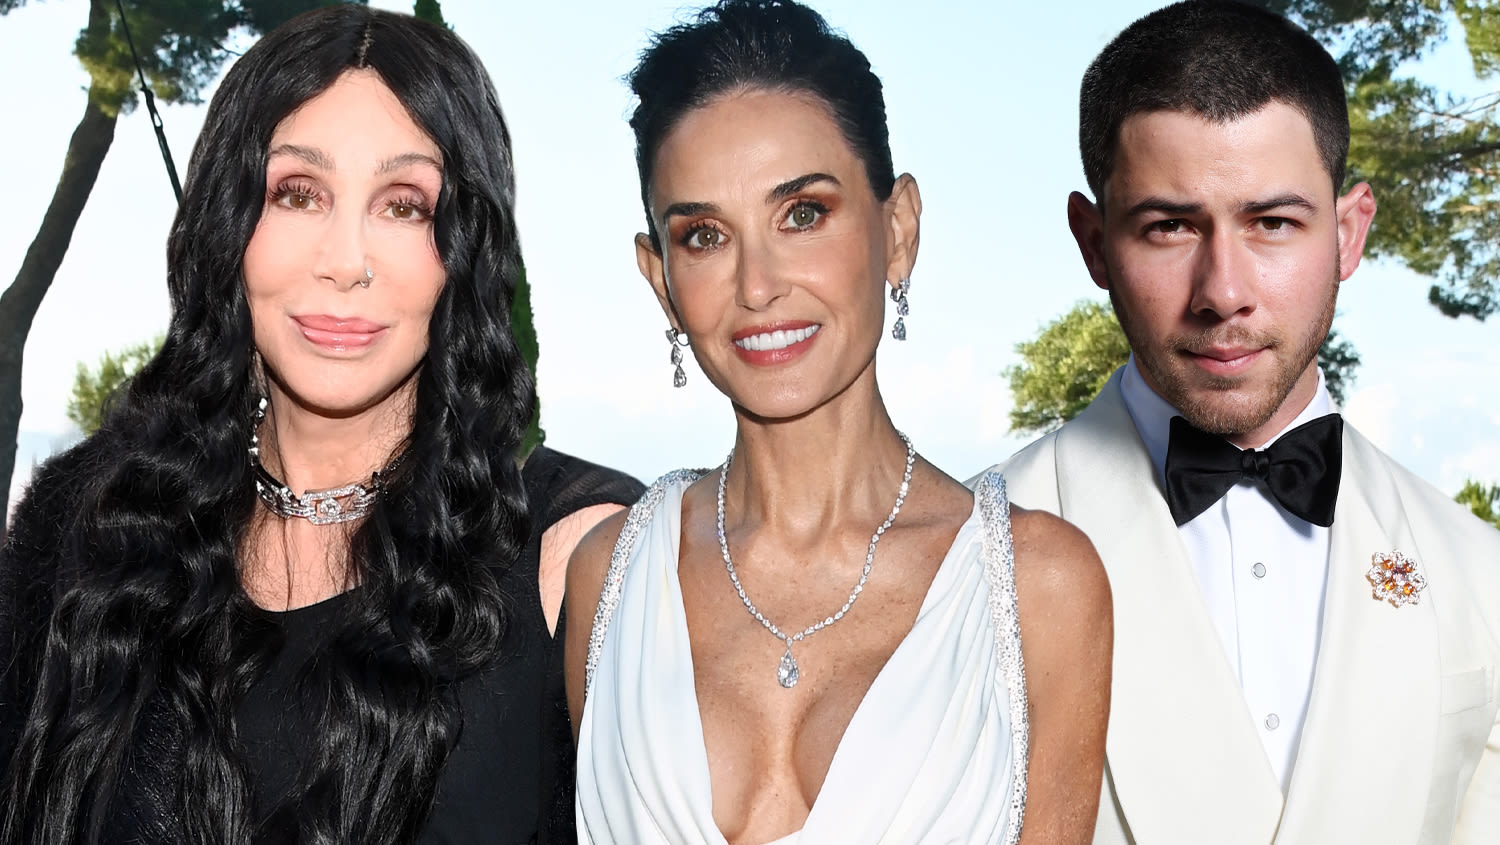 ...Glam By The Ocean: Demi Moore Hosted Event Raises $16M And Roof With Nick & Joe Jonas, Cher Performances